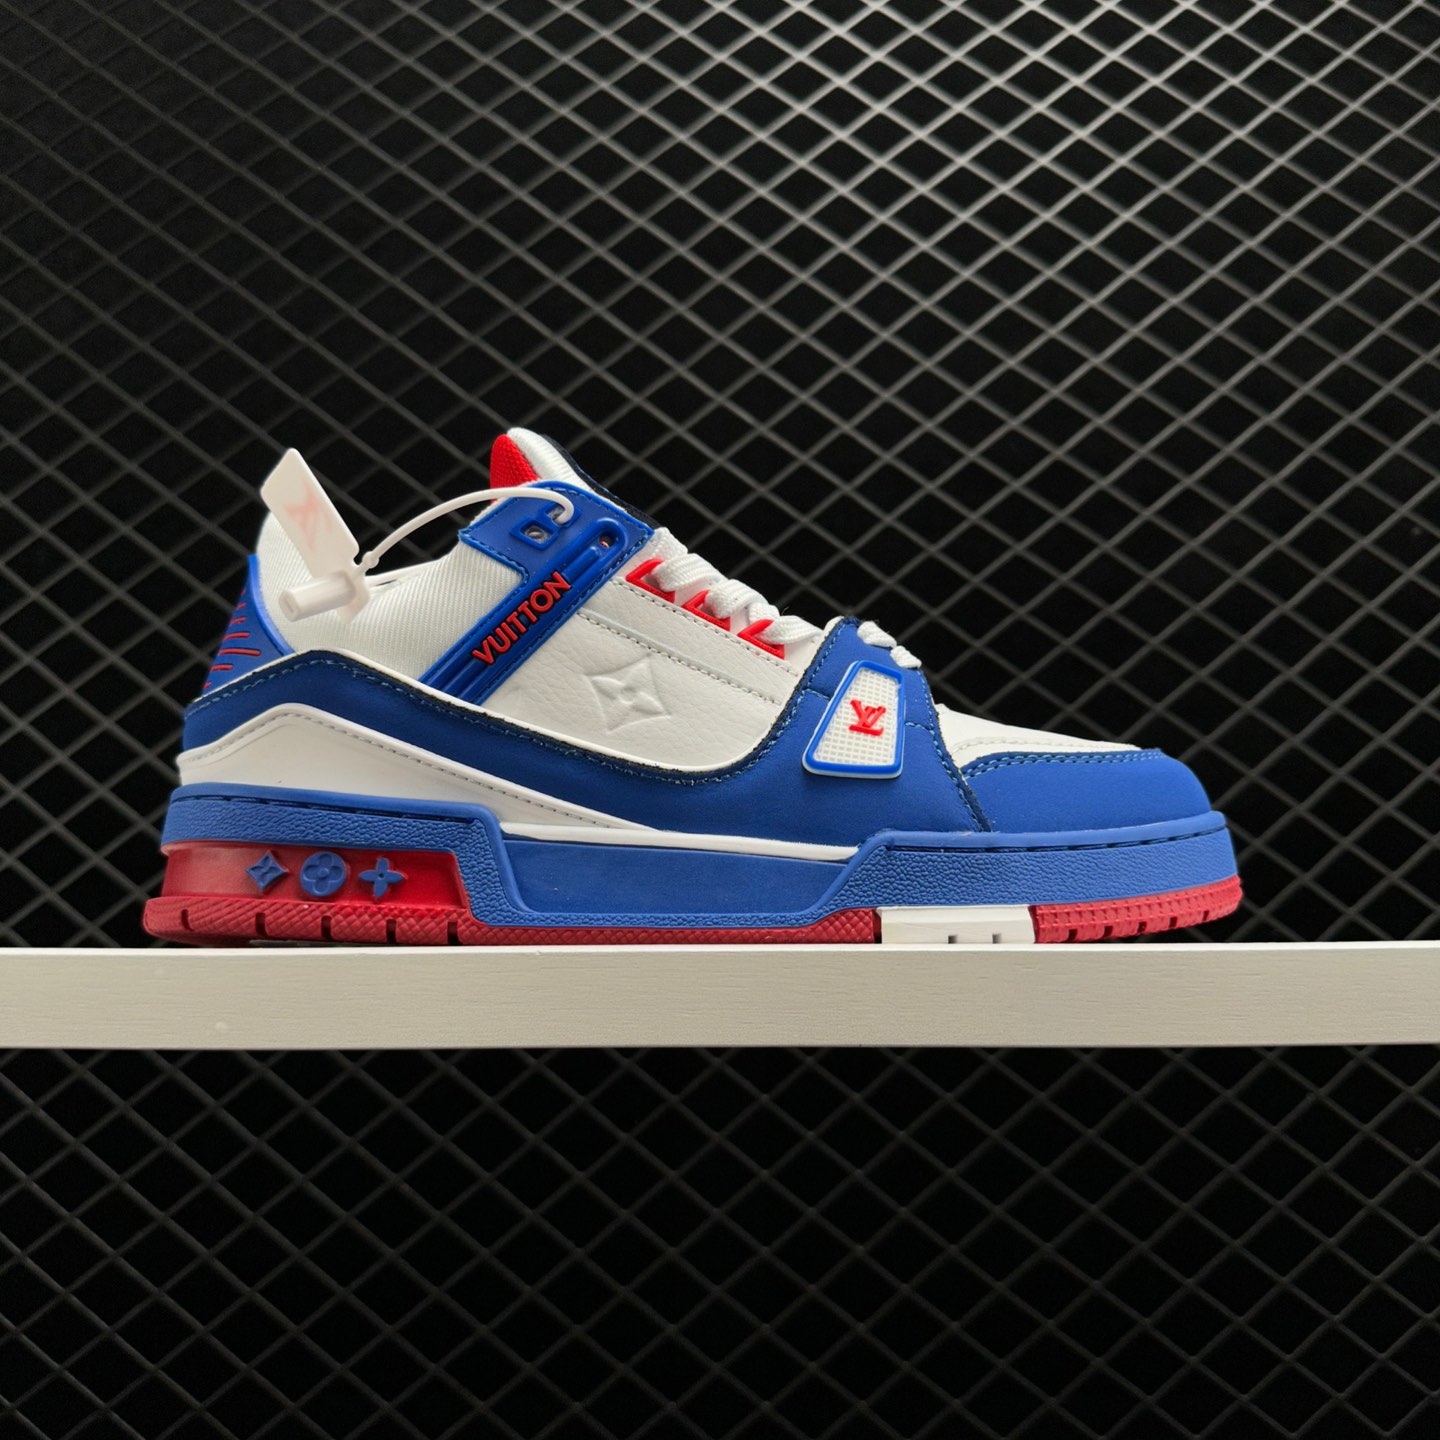 Louis Vuitton Trainer Sneaker 'White Blue Red' 1A8ZSY - Premium Footwear with Iconic Design